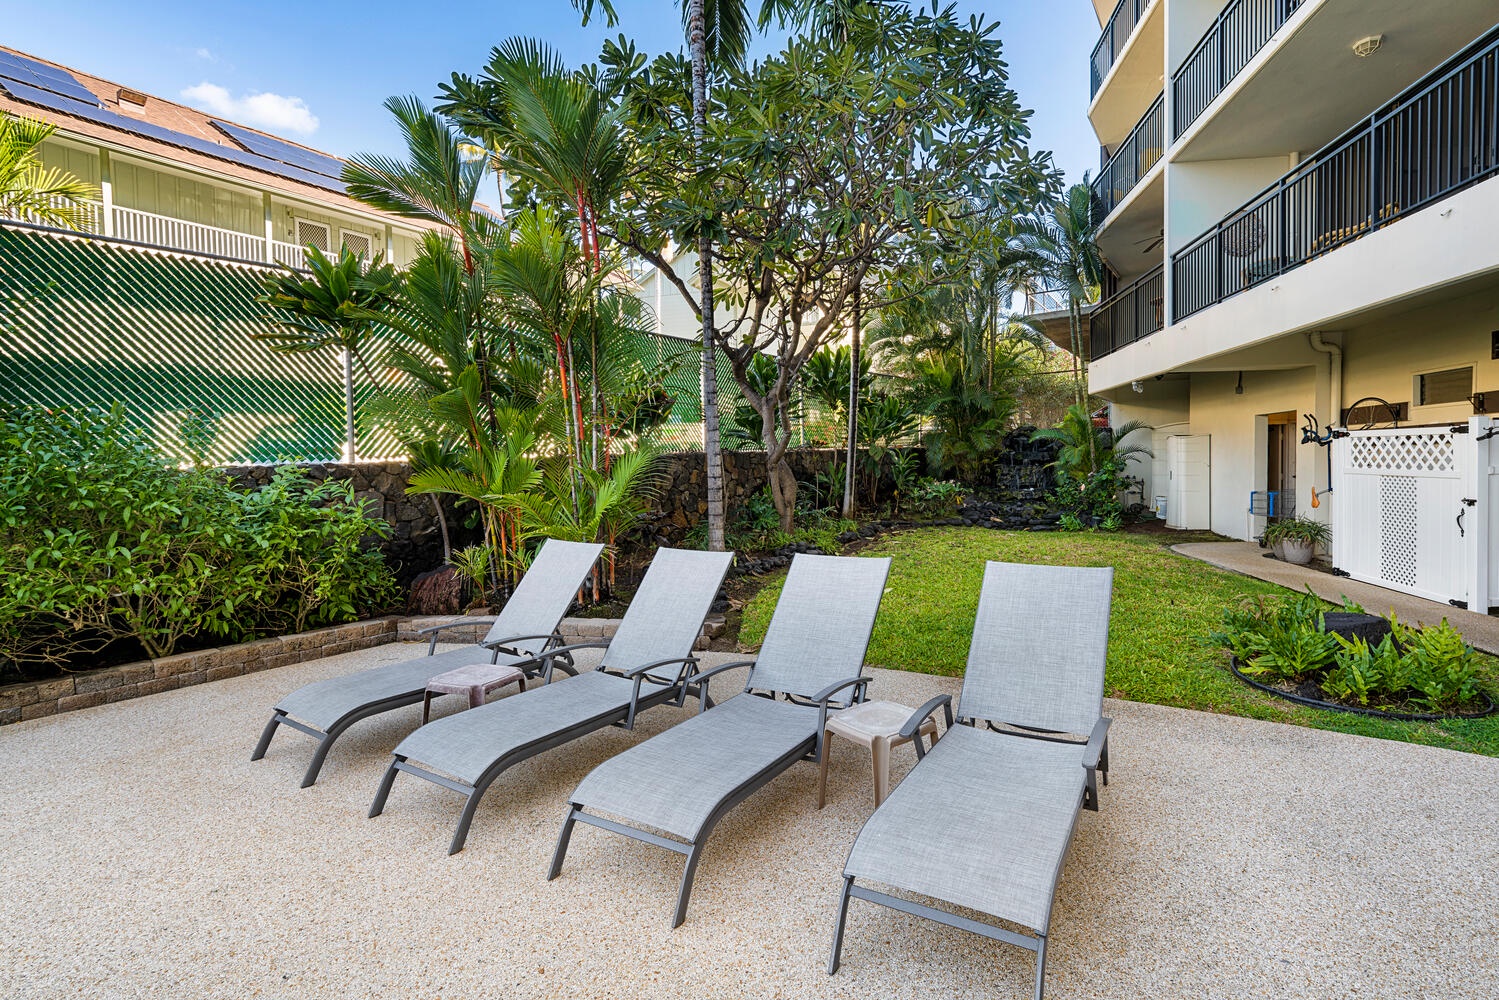 Kailua Kona Vacation Rentals, Kona Alii 403 - Poolside loungers available for swimmers.